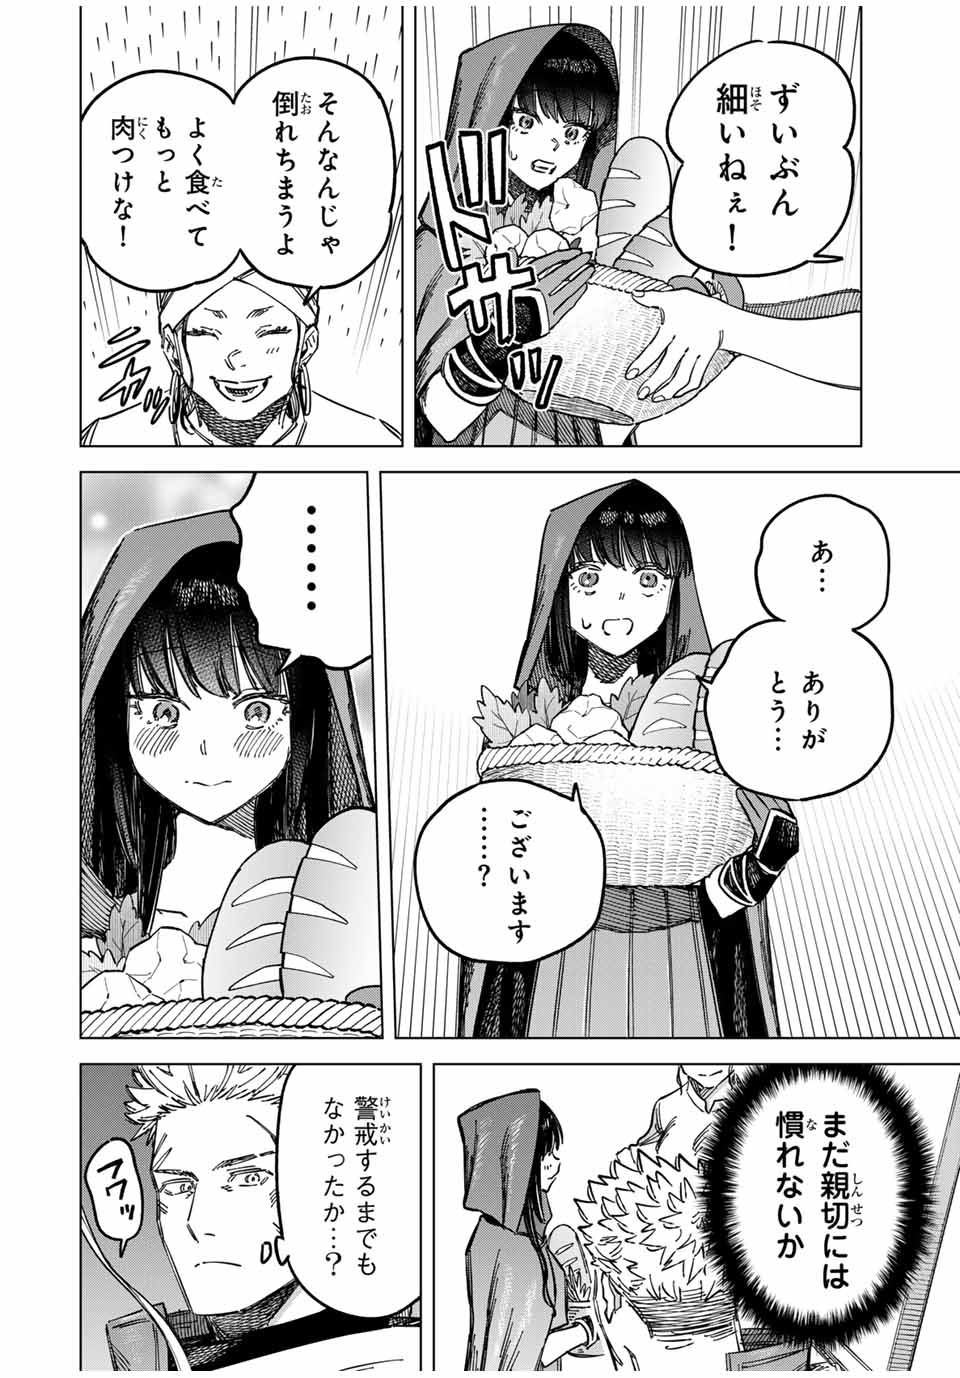 Witch and Mercenary 魔女と傭兵 第3話 - Page 16